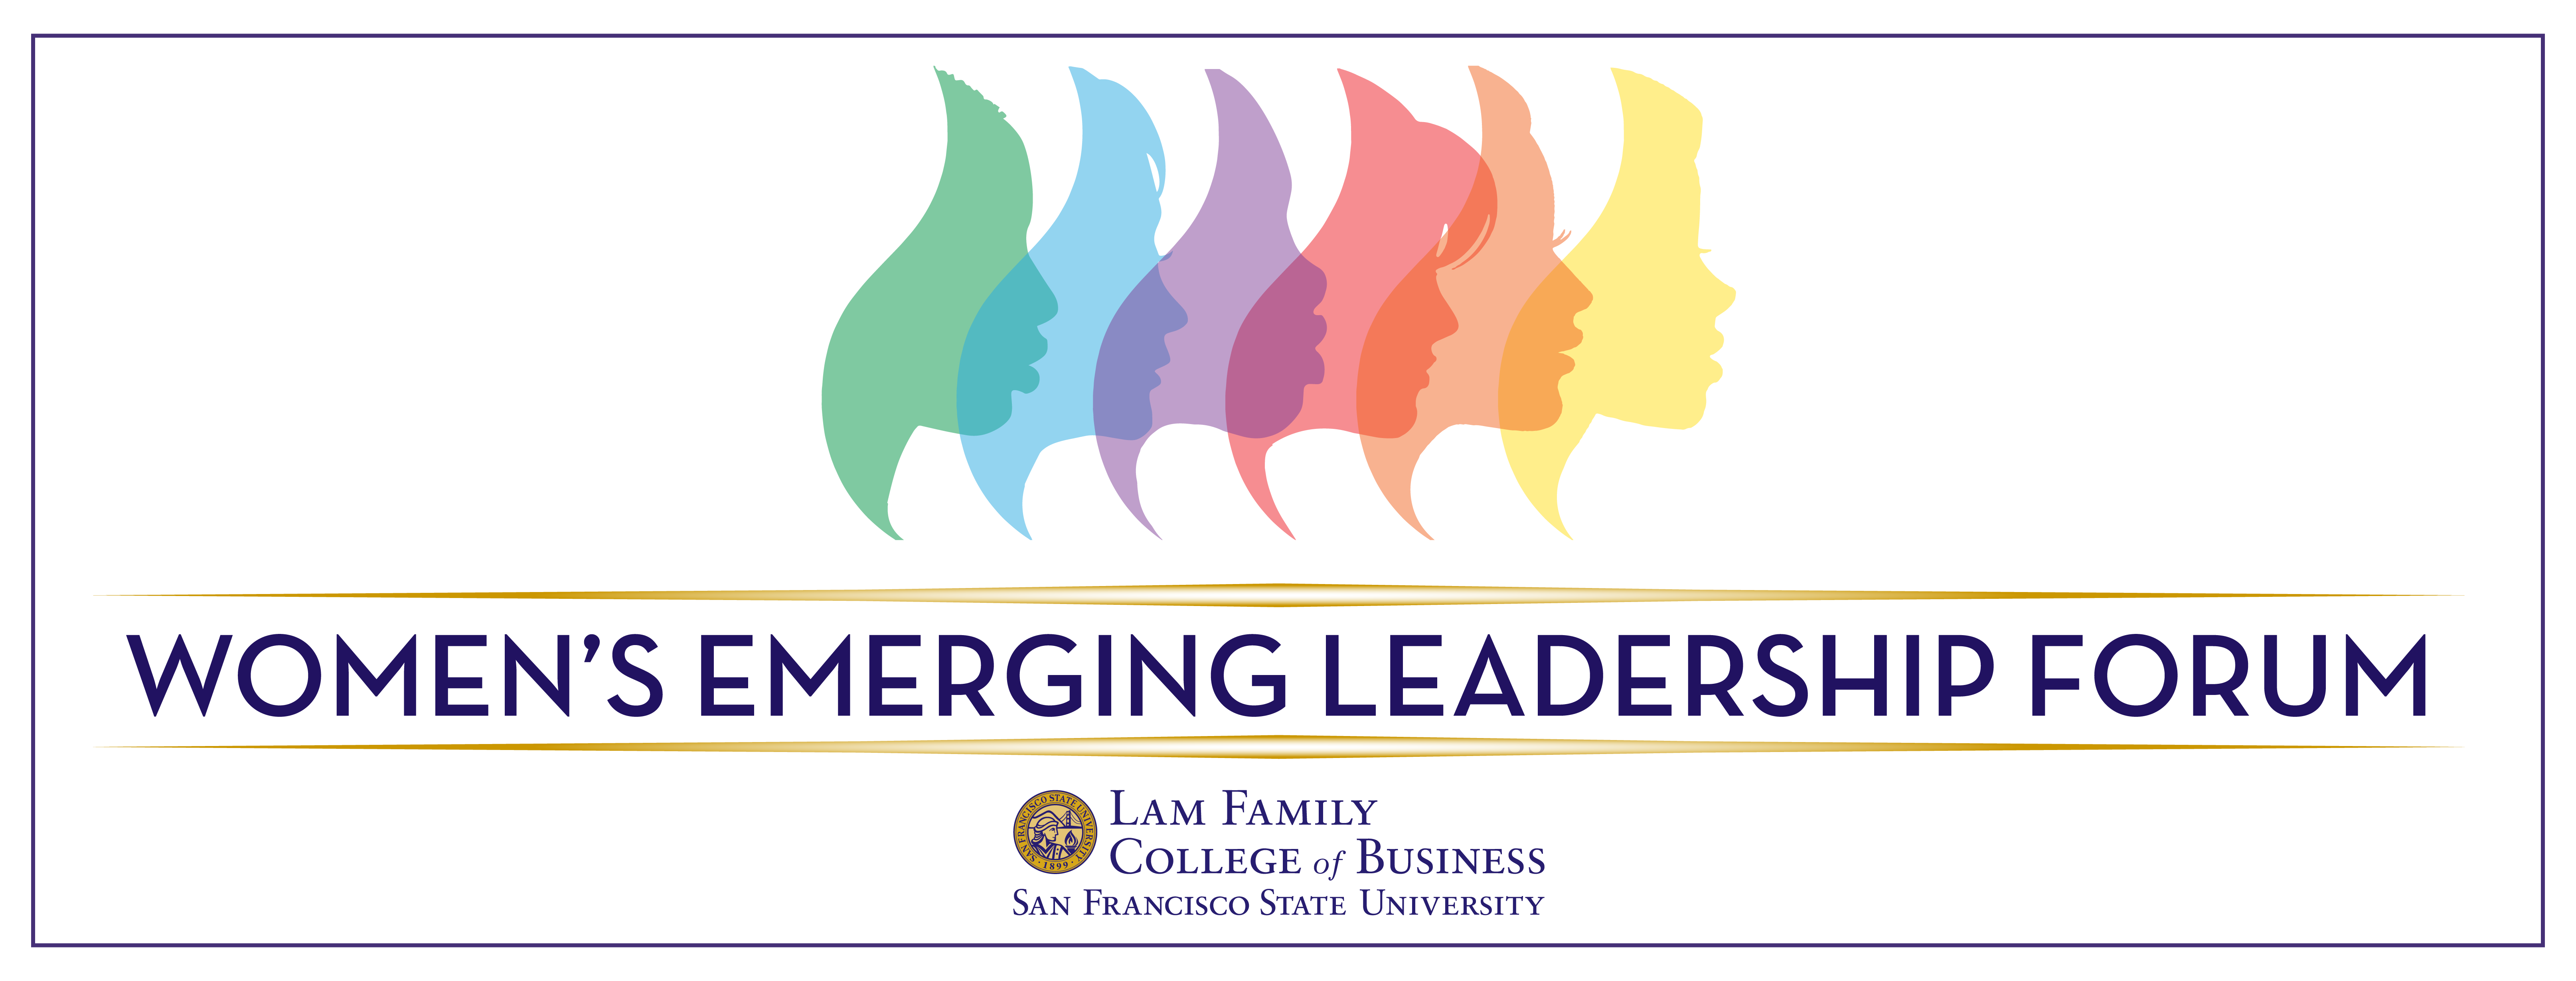 Women's Emerging Leadership Forum Lam Family College of Business San Francisco State University logo with graphic of six female heads silhouetted in green blue purple red orange and yellow